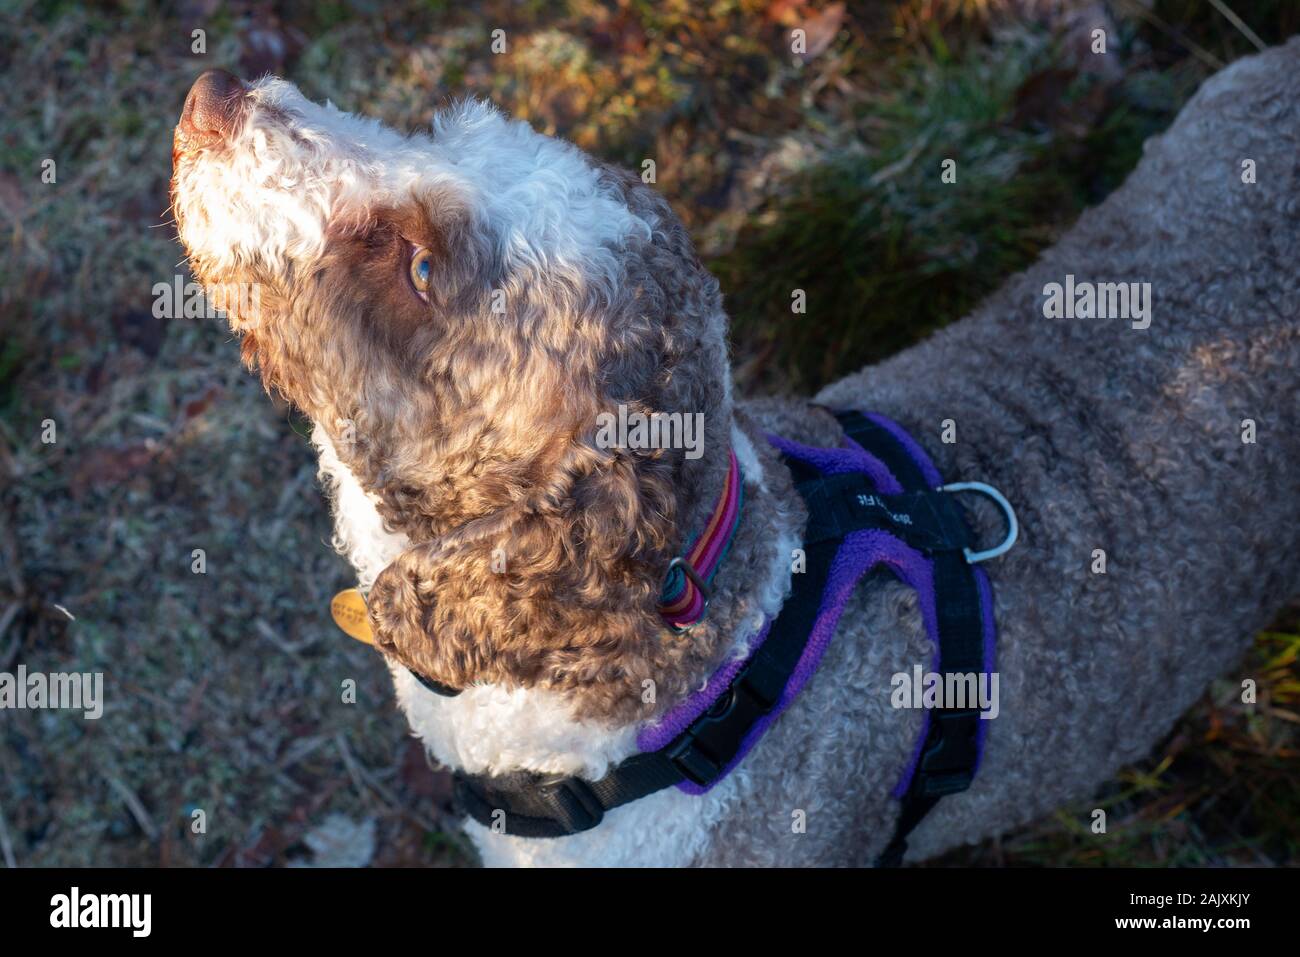 Spanish water dog with harness on Stock Photo